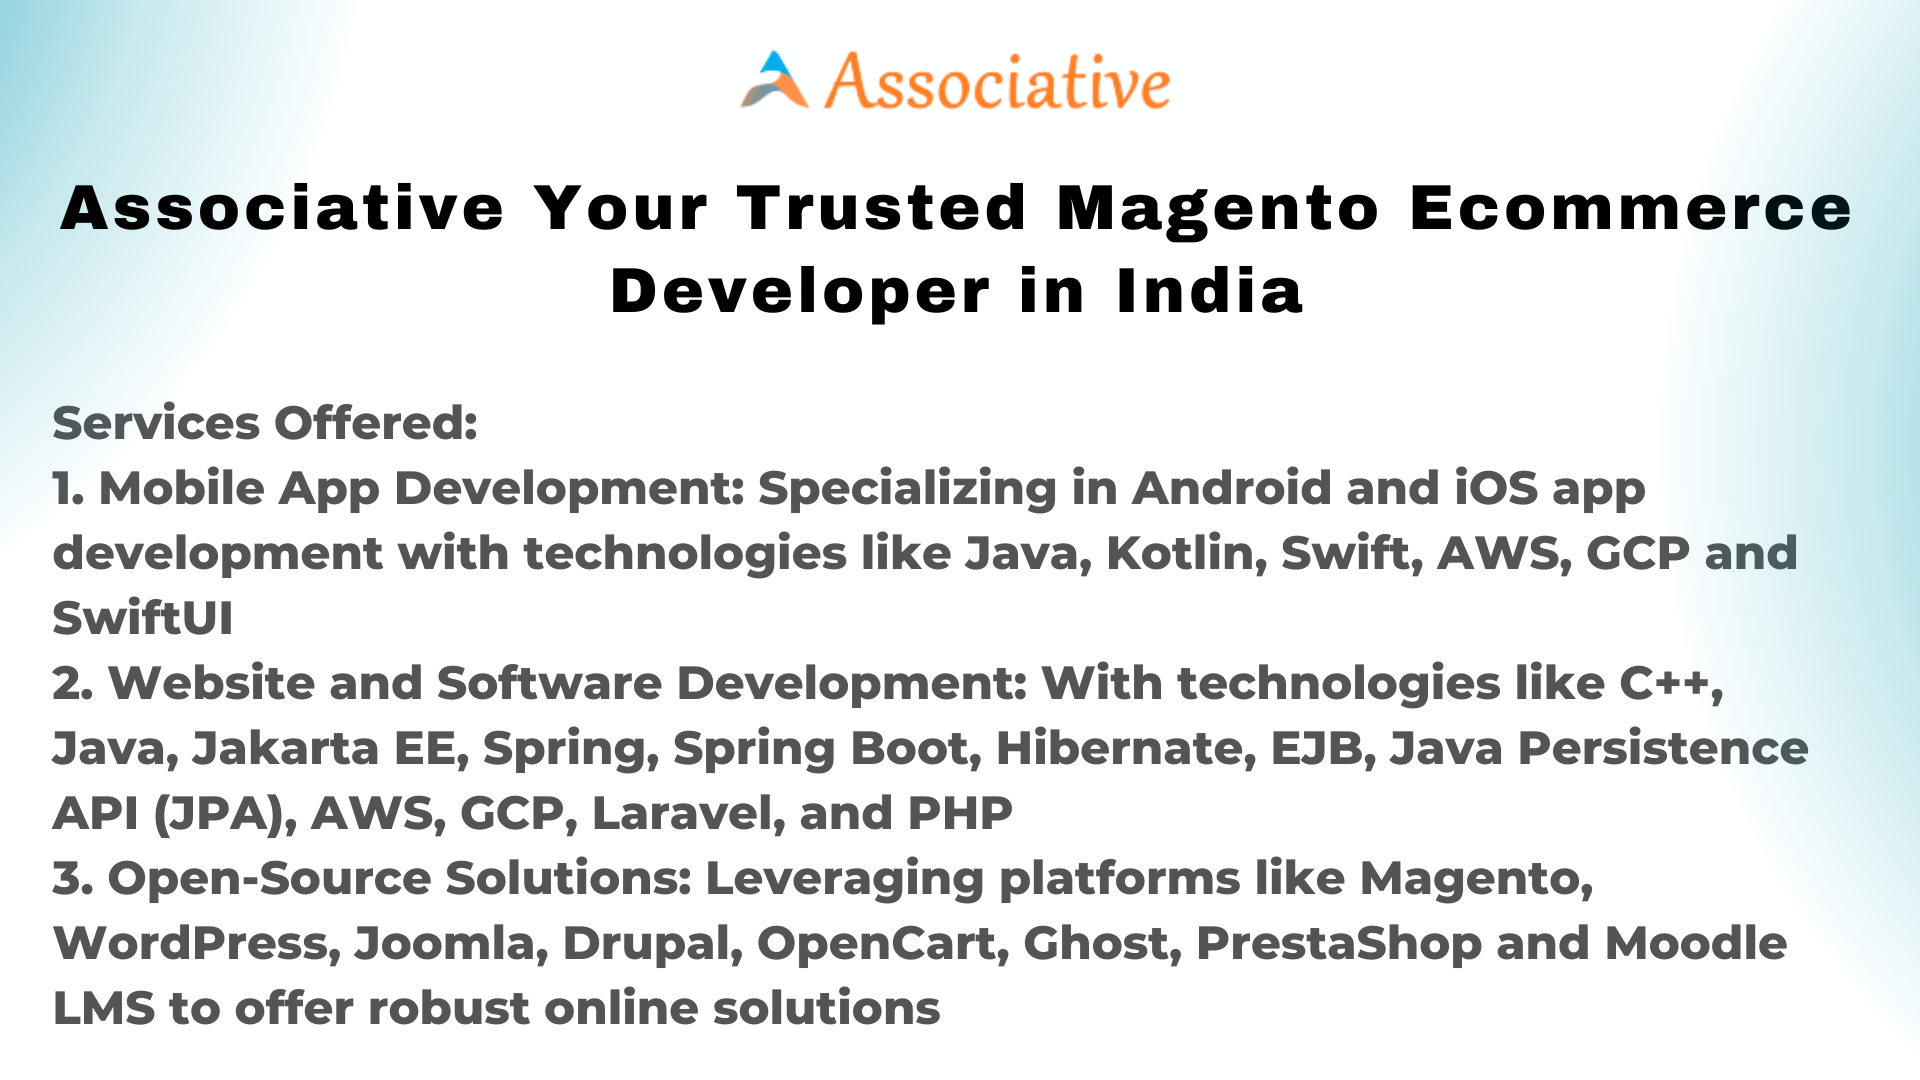 Associative Your Trusted Magento Ecommerce Developer in India